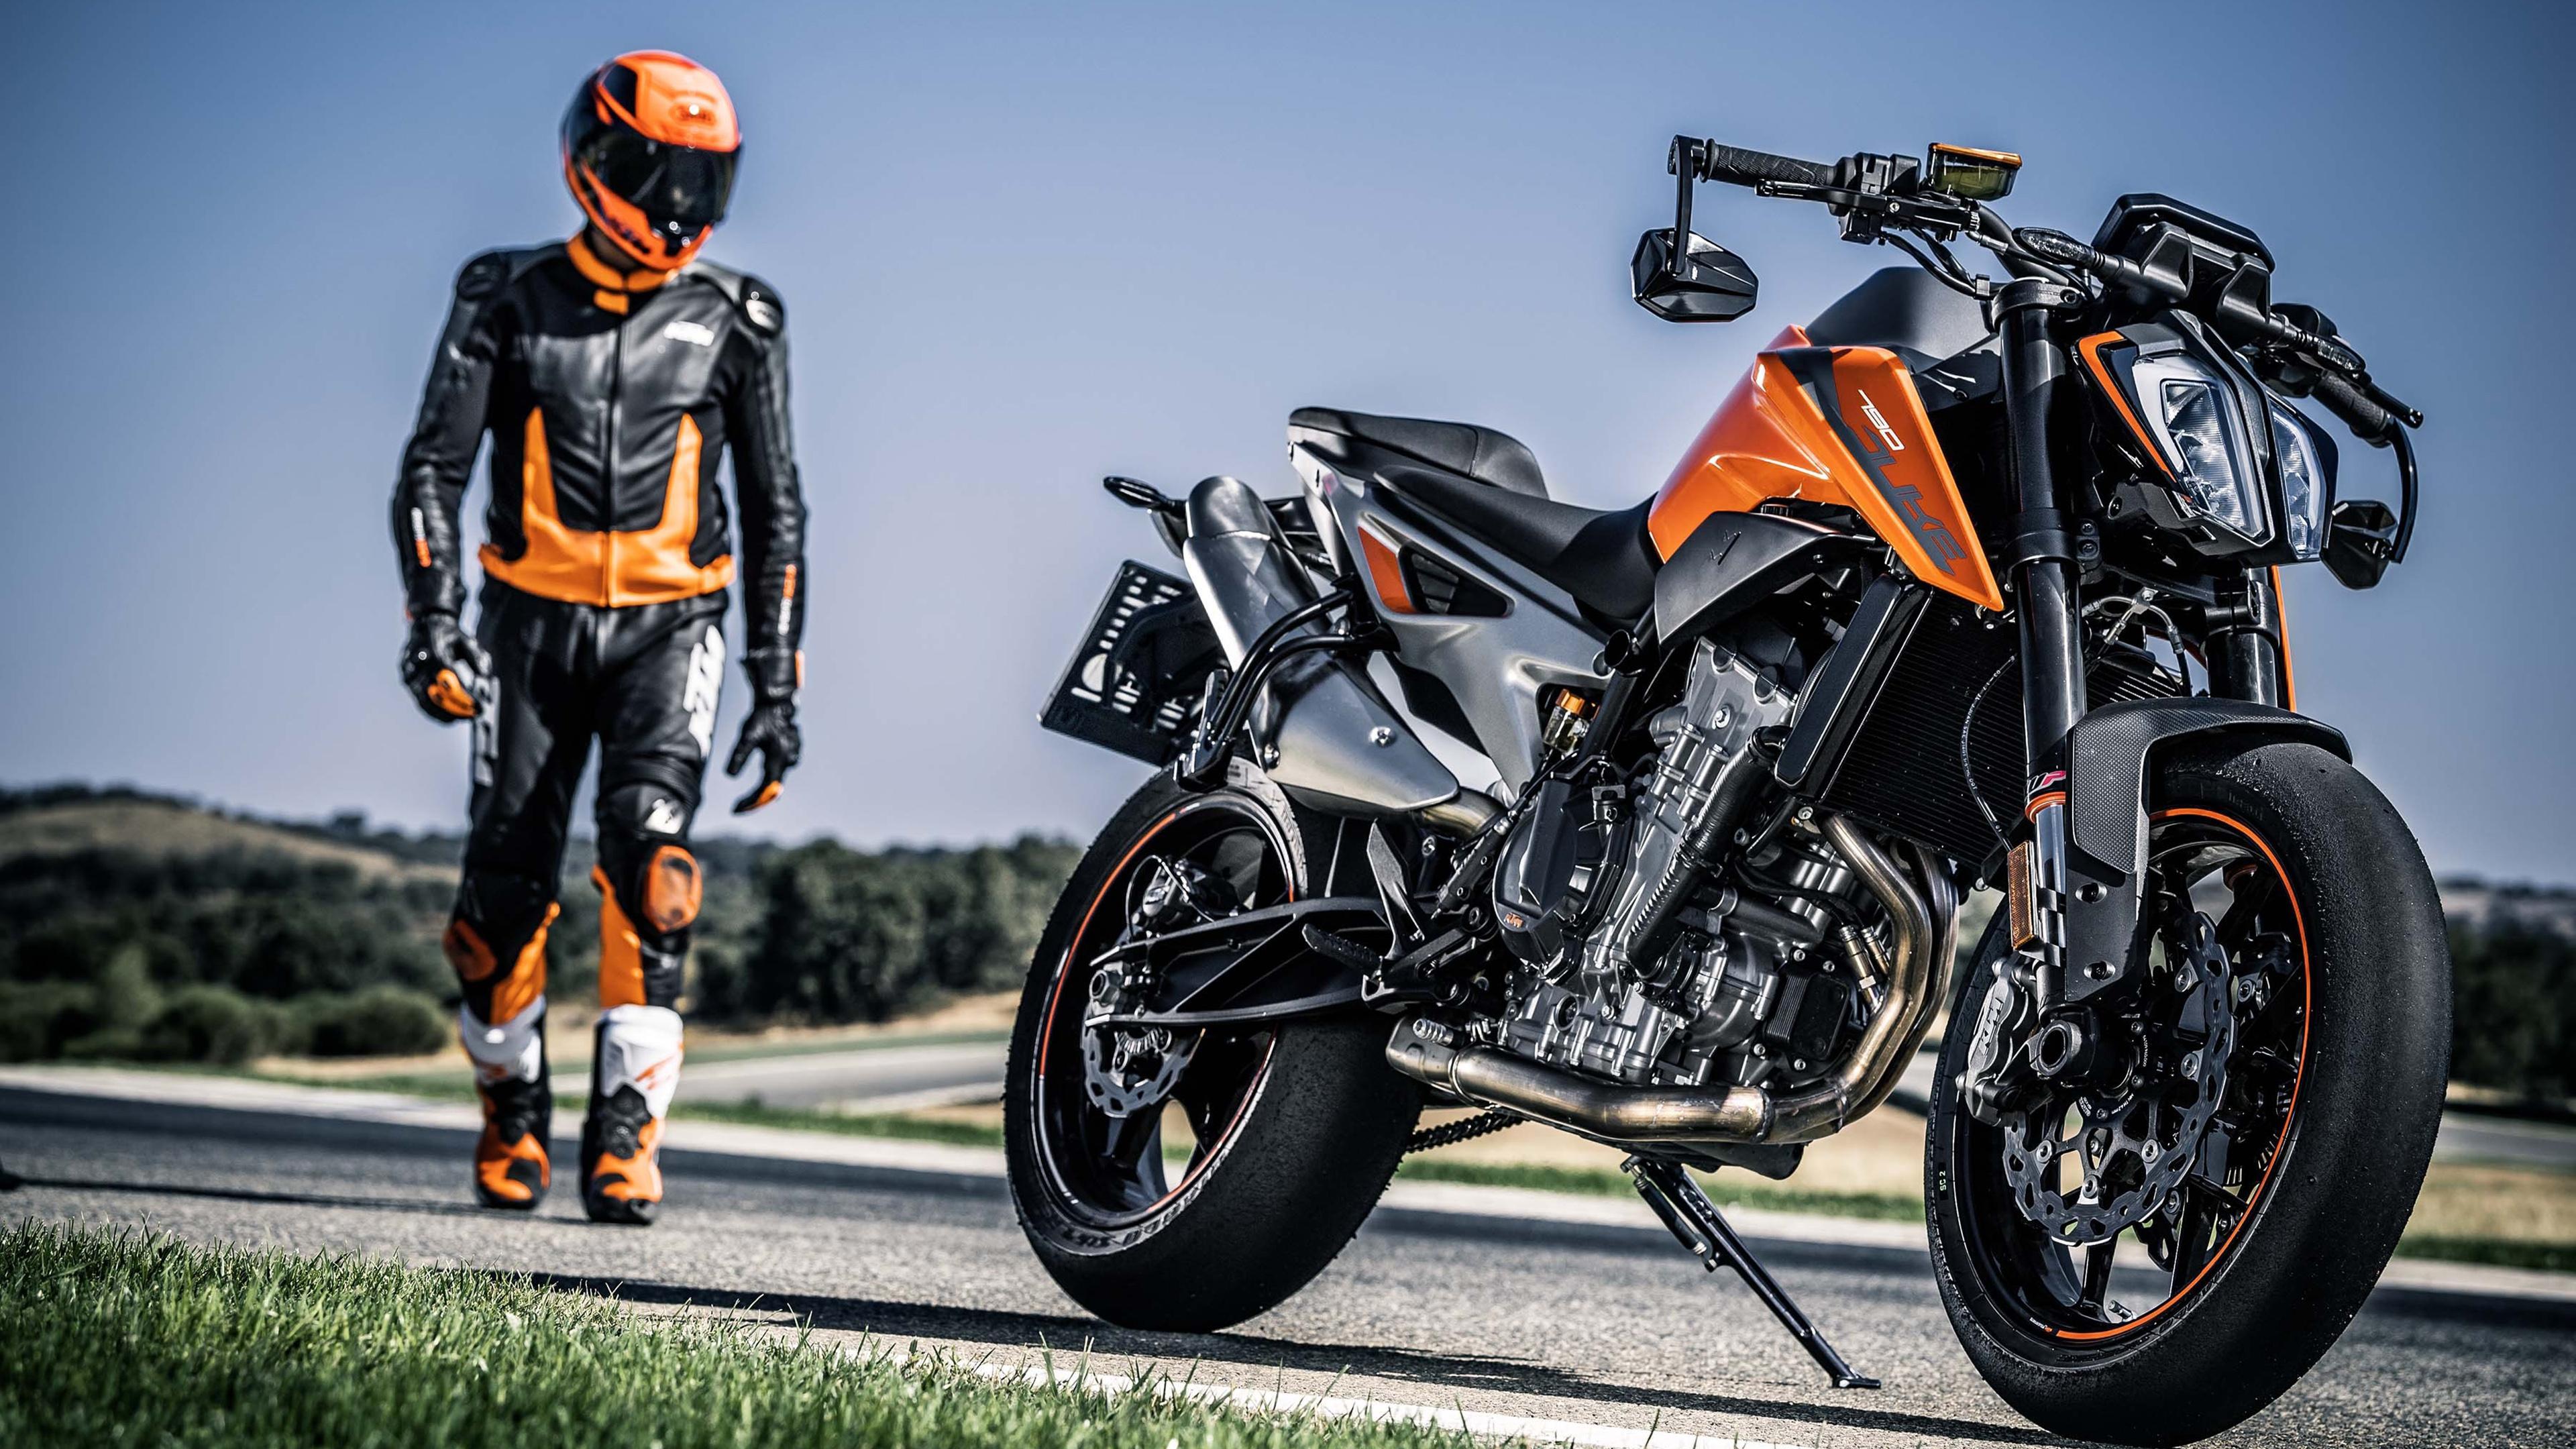 Sleek And Powerful Ktm Background 4k For Motorcycle Enthusiasts